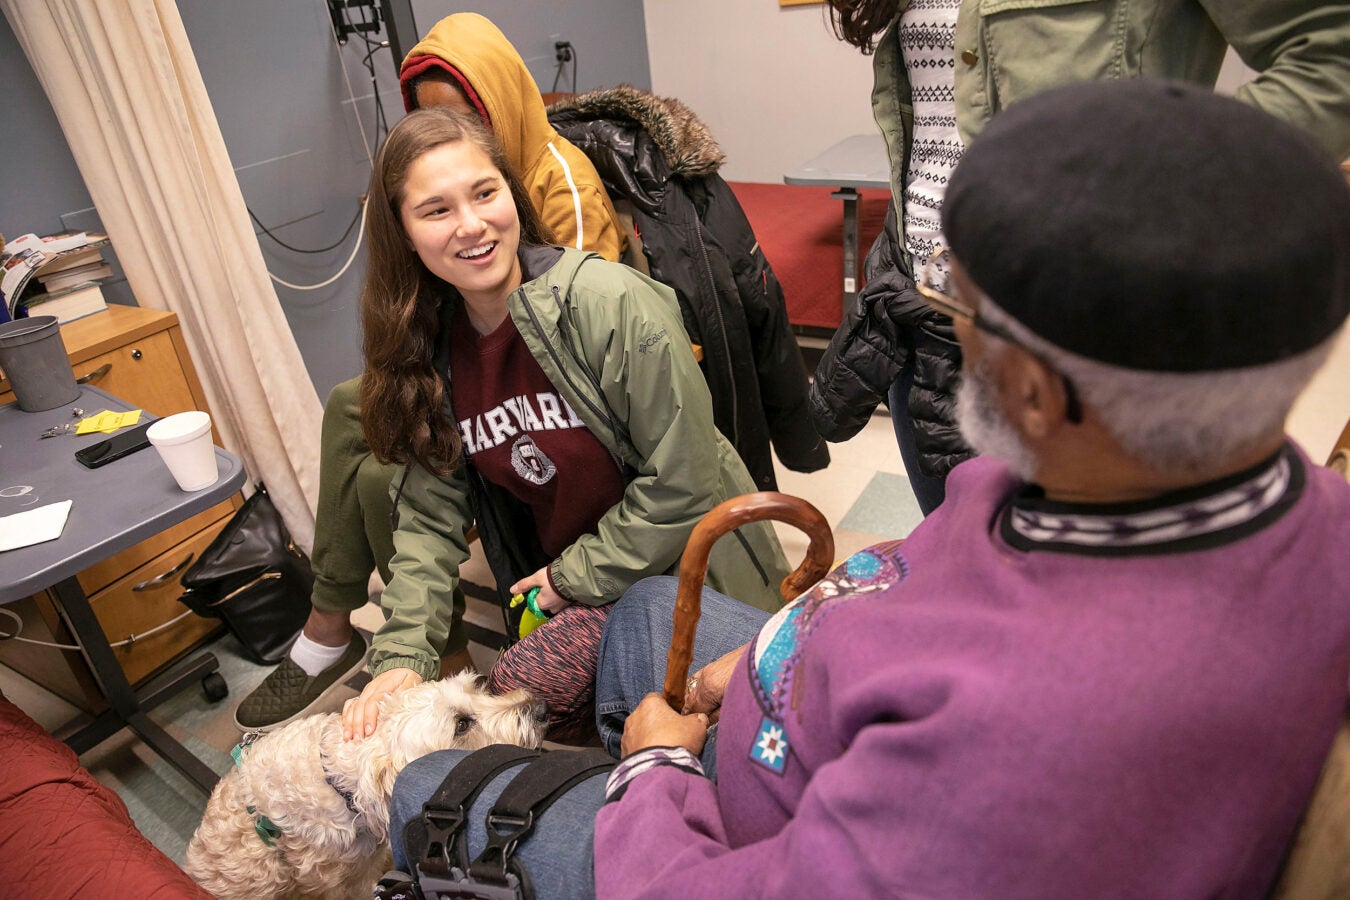 Student and dog visiting residents of rehab center.